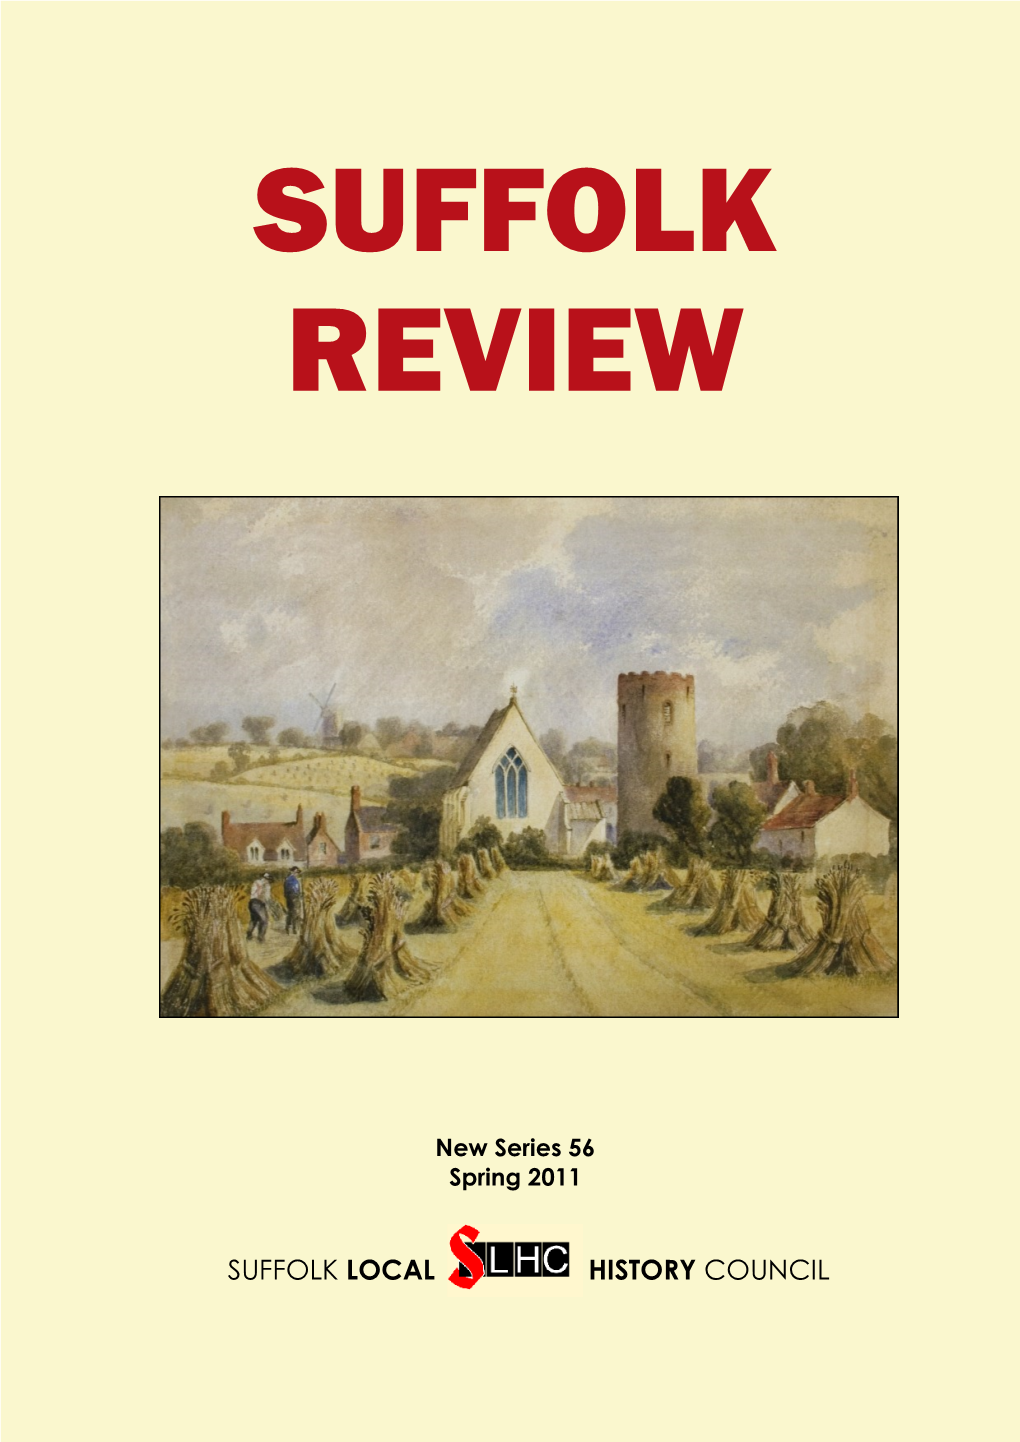 Suffolk Local History Council